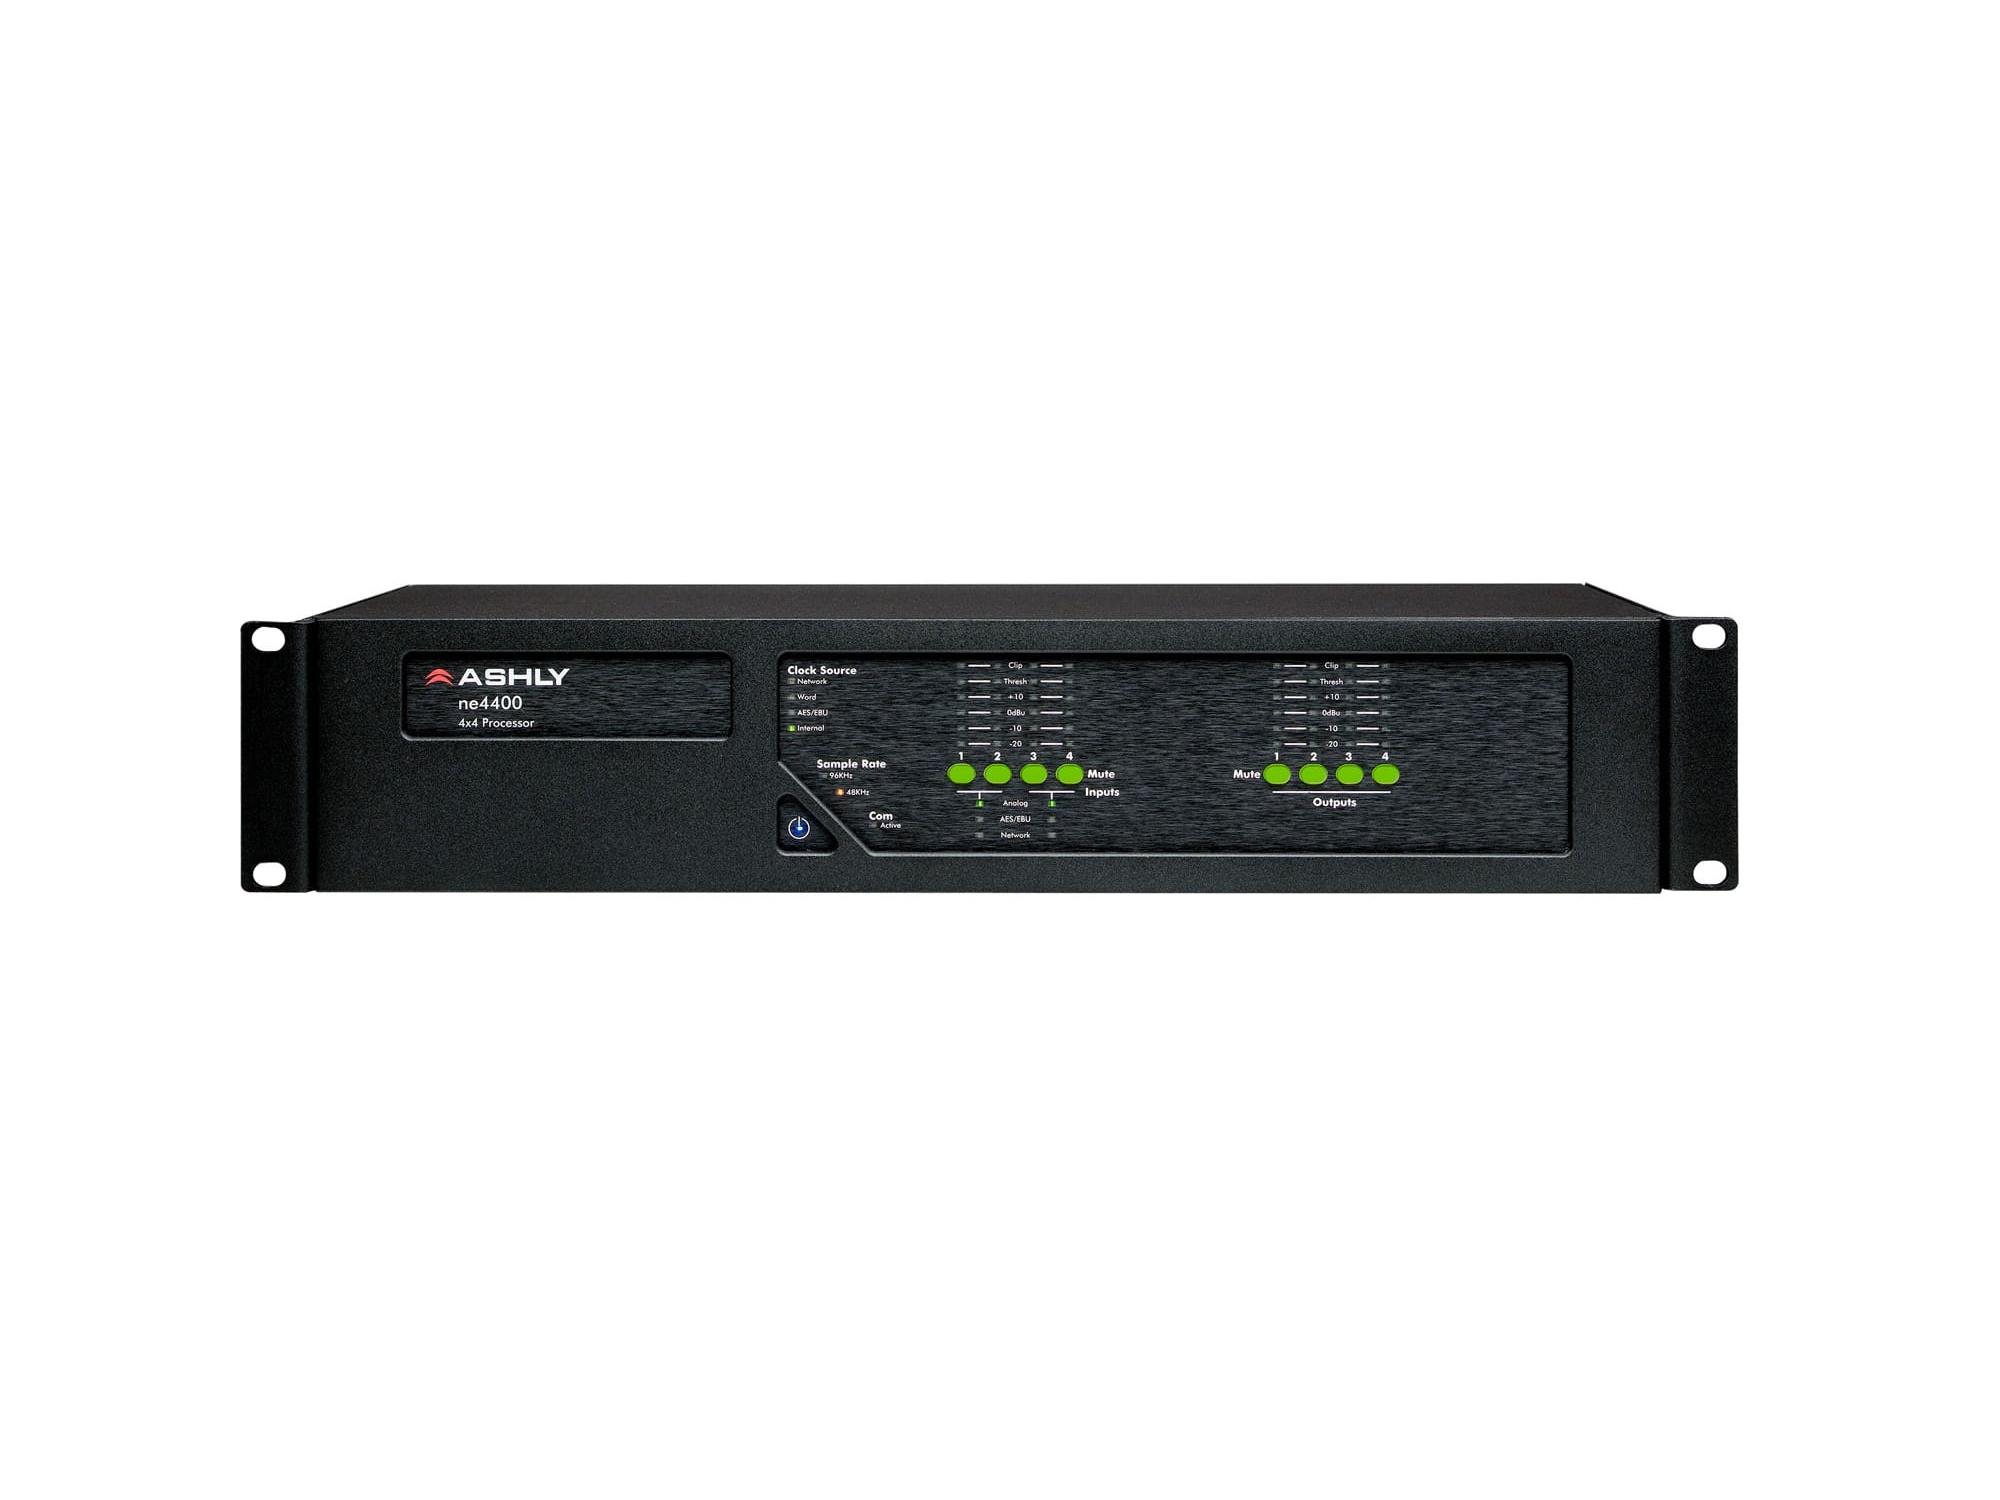 Ashly ne4400m Protea DSP Audio System Processor 4x4 I/O with 4-Channel Mic Inputs